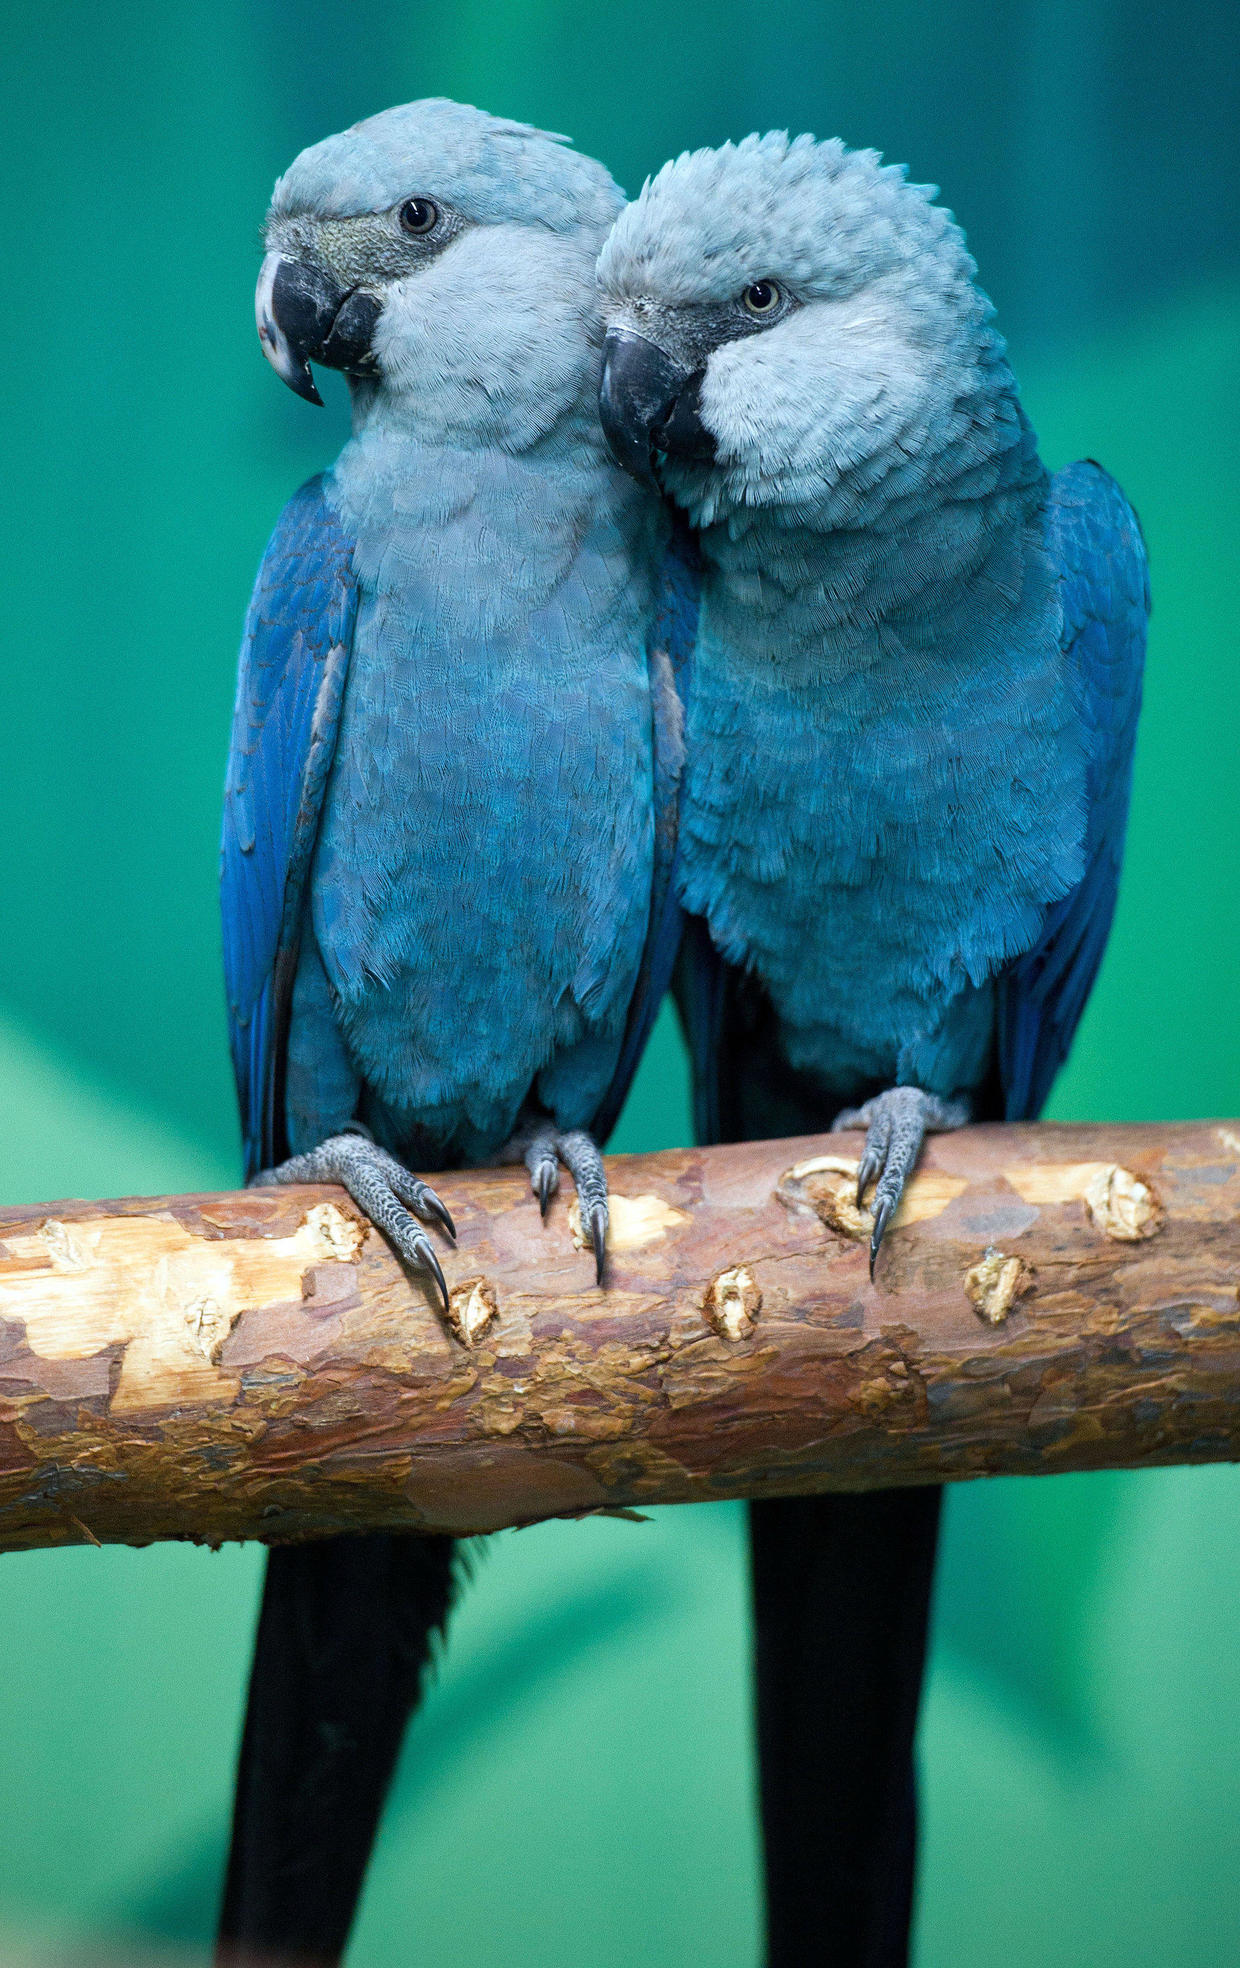 Blue macaw parrot that inspired "Rio" is now officially extinct in the